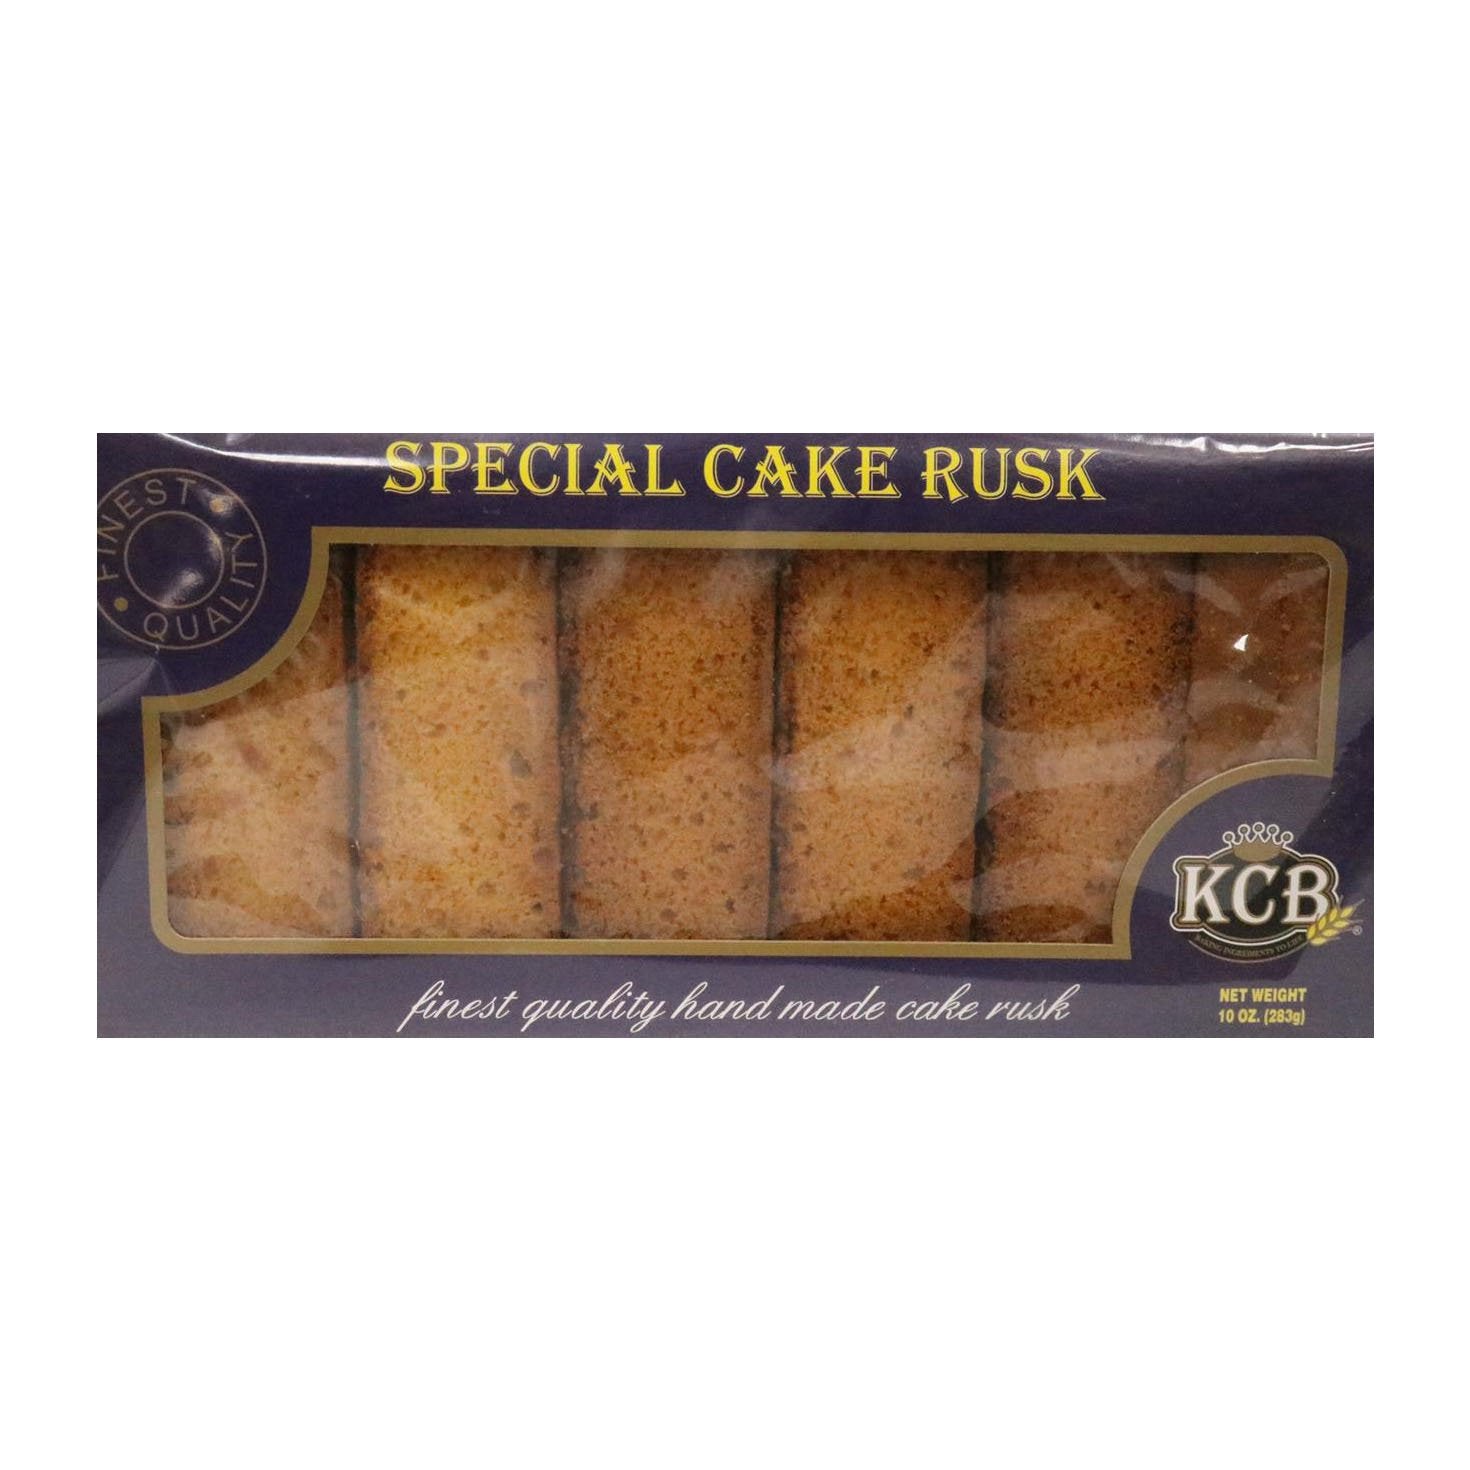 Kcb Special Cake Rusk